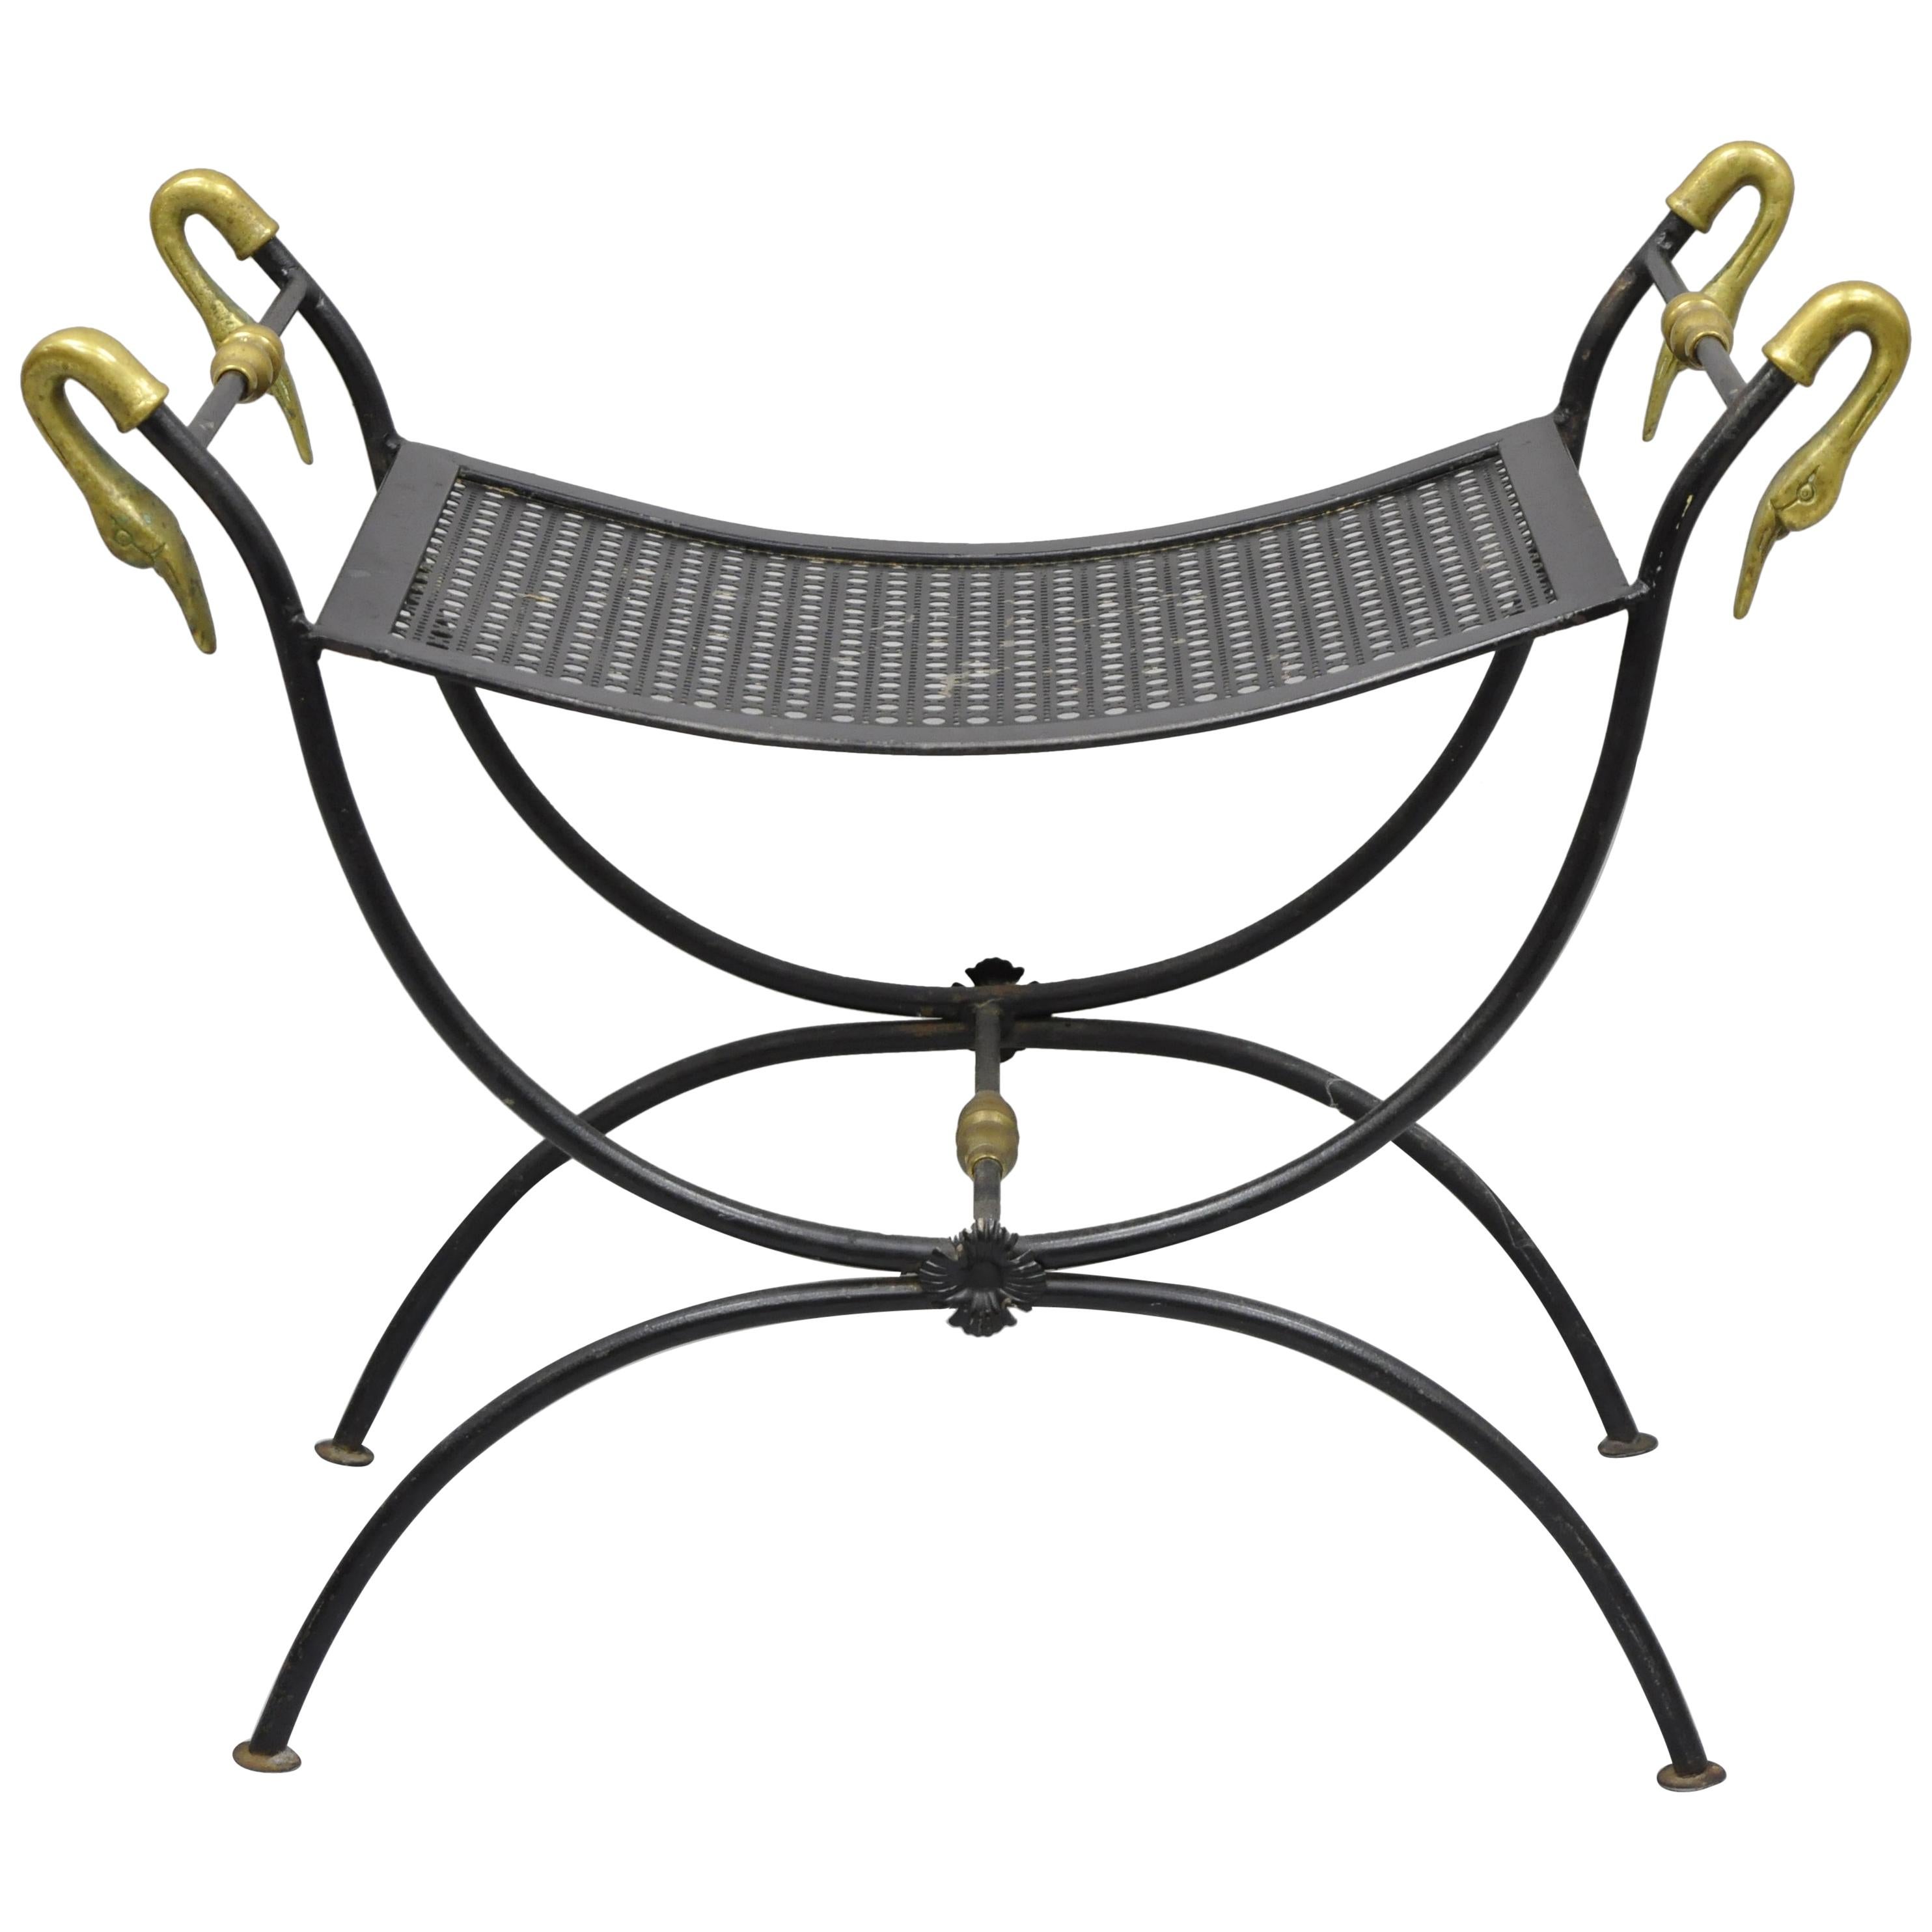 Wrought Iron and Brass Classical Swan French Regency Style Curule Vanity Bench